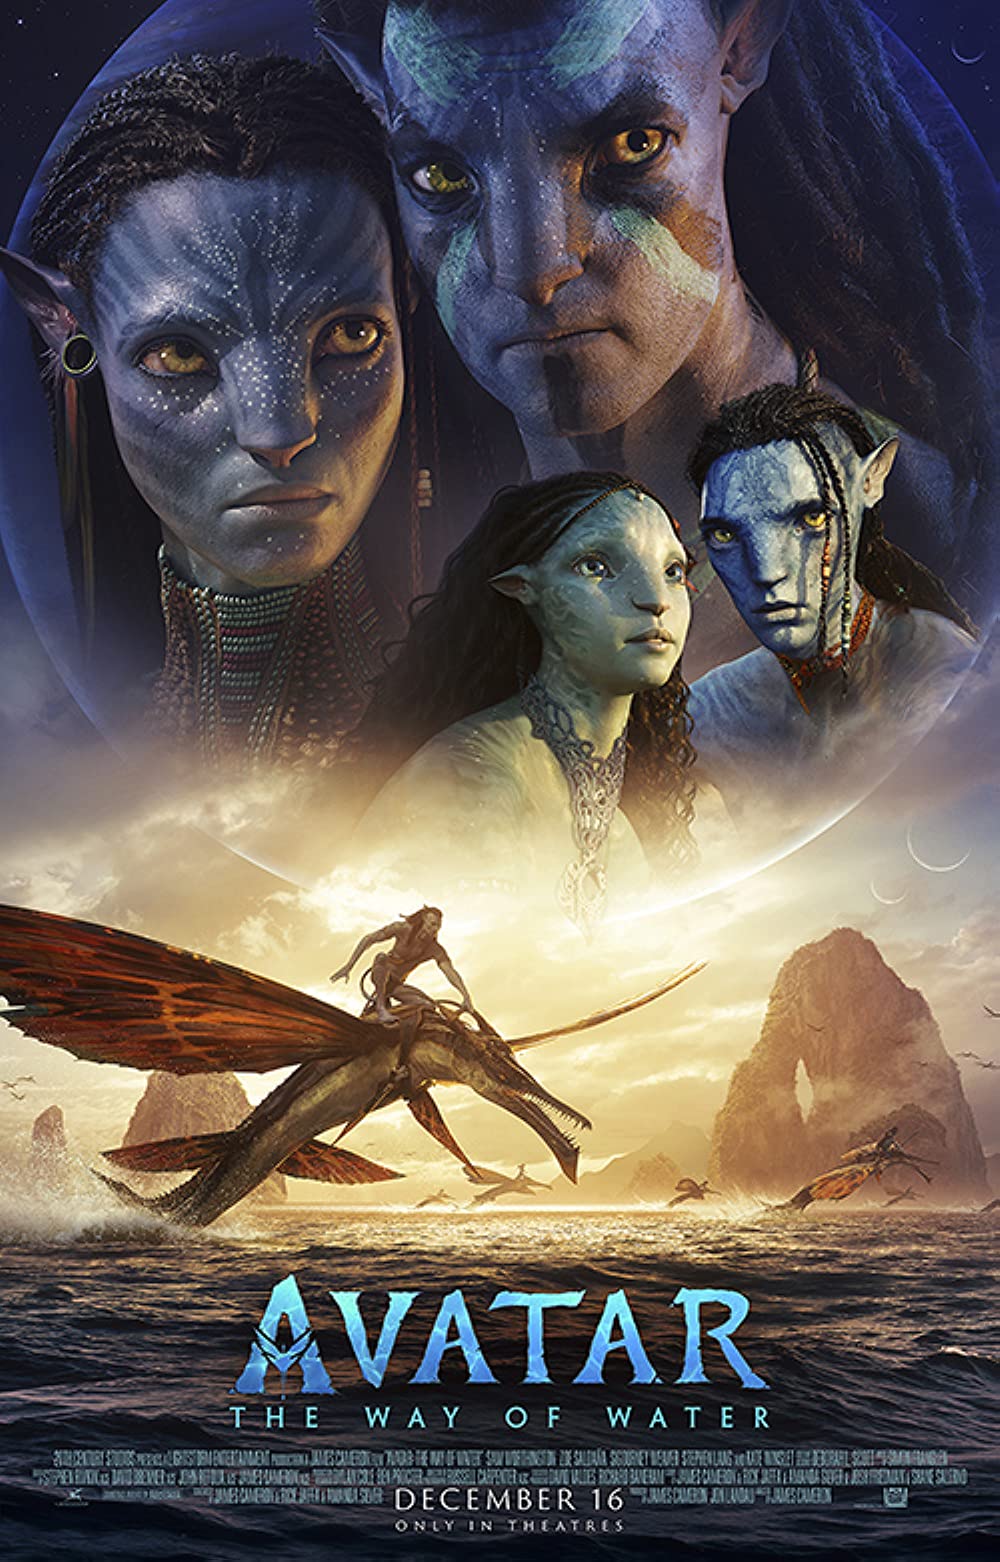 Avatar The Way of Water 2022 Hindi Dubbed Official Trailer 1080p | 720p HDRip 53MB Download